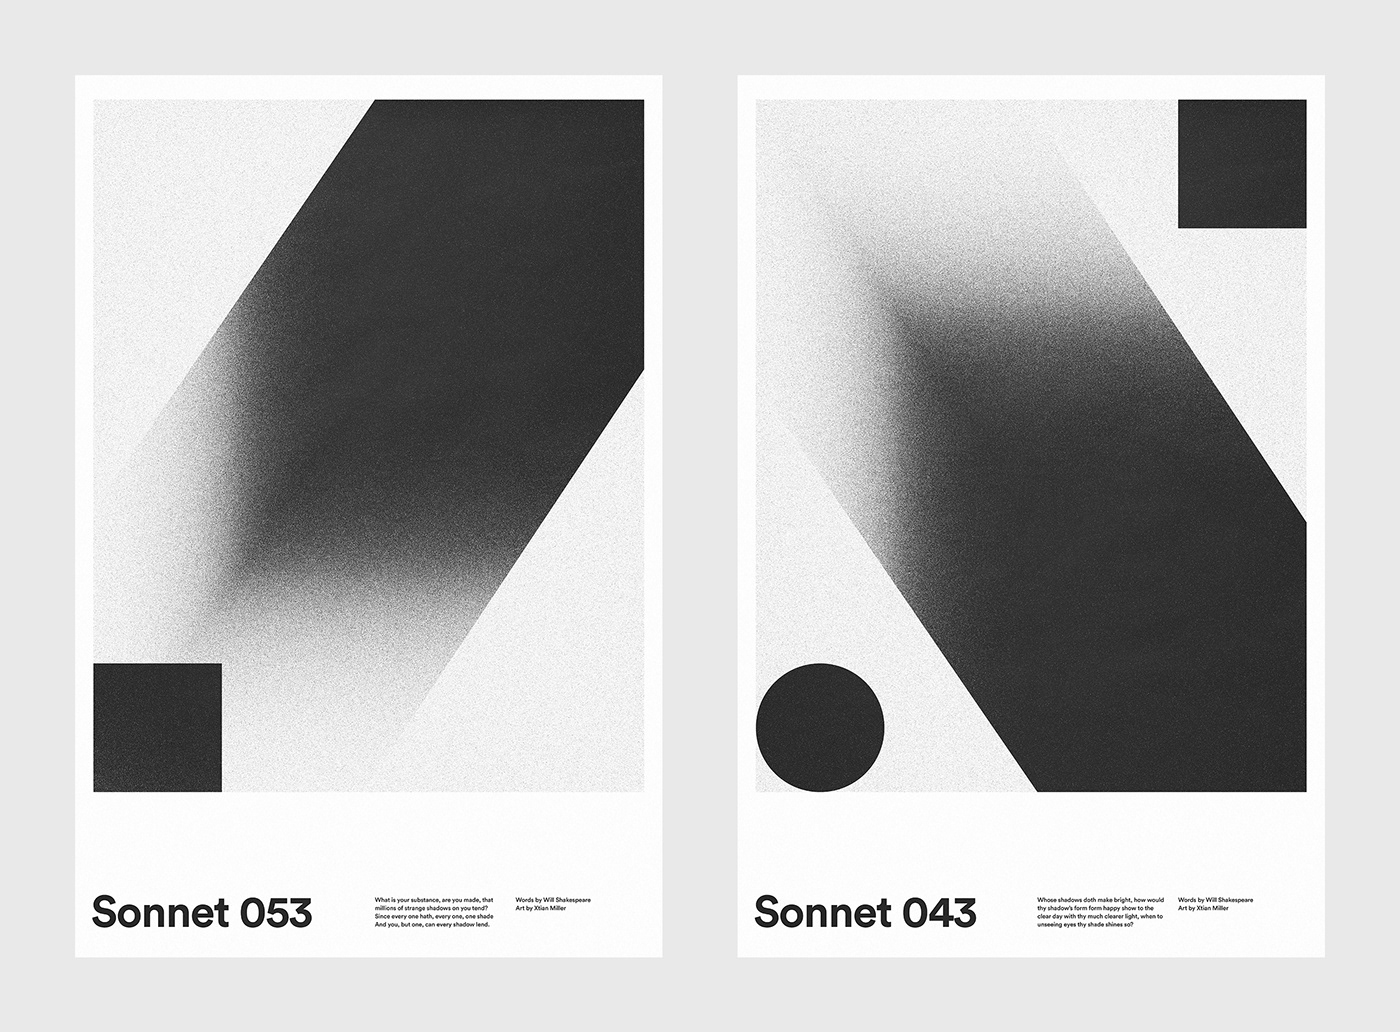 Sonnet 053 and 043